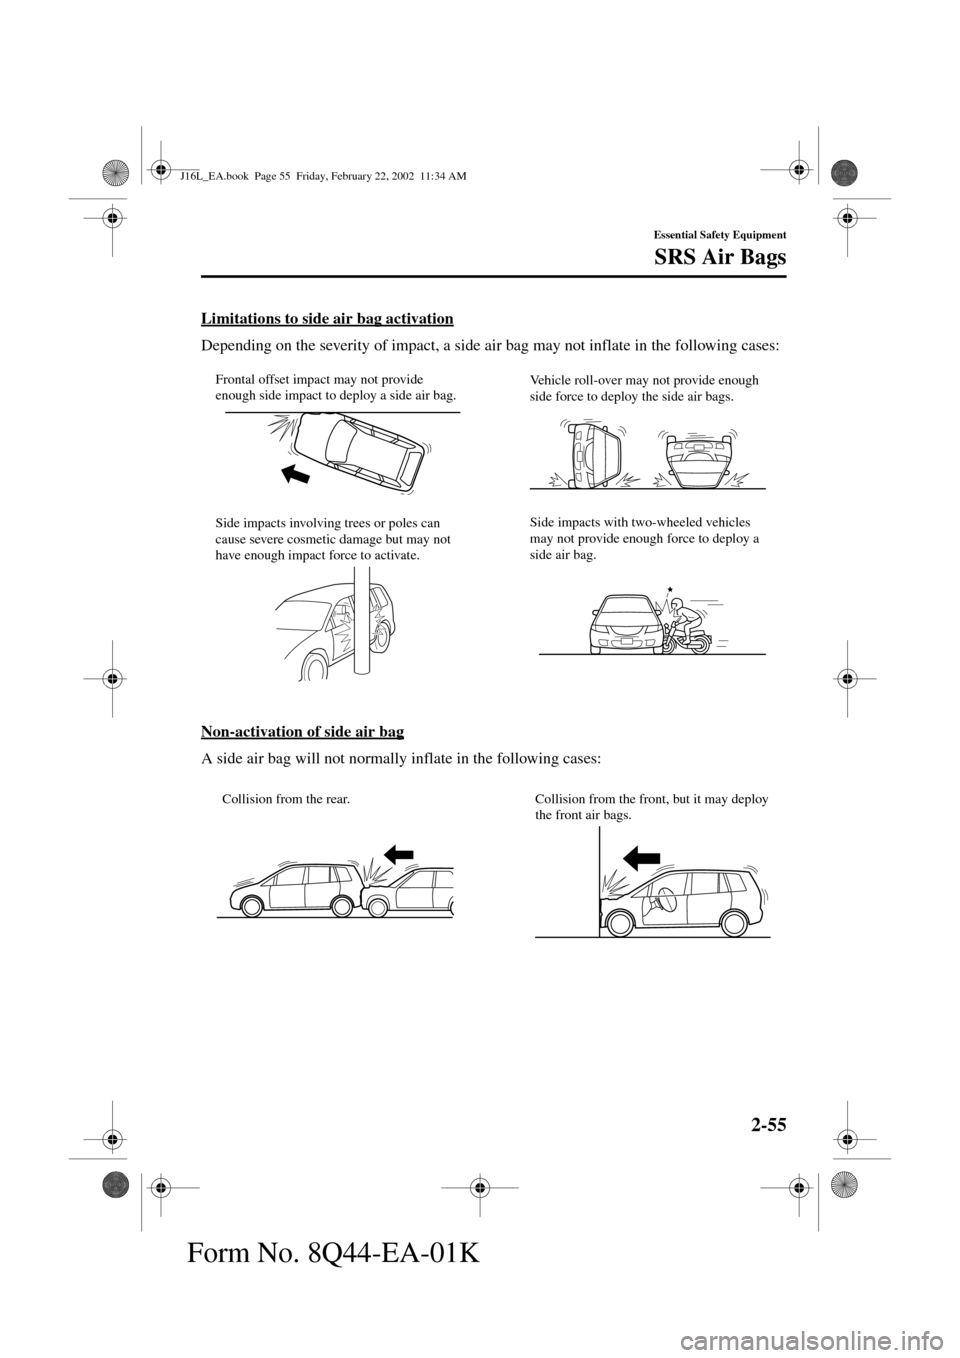 MAZDA MODEL MPV 2002  Owners Manual (in English) 2-55
Essential Safety Equipment
SRS Air Bags
Form No. 8Q44-EA-01K
Limitations to side air bag activation
Depending on the severity of impact, a side air bag may not inflate in the following cases:
Non